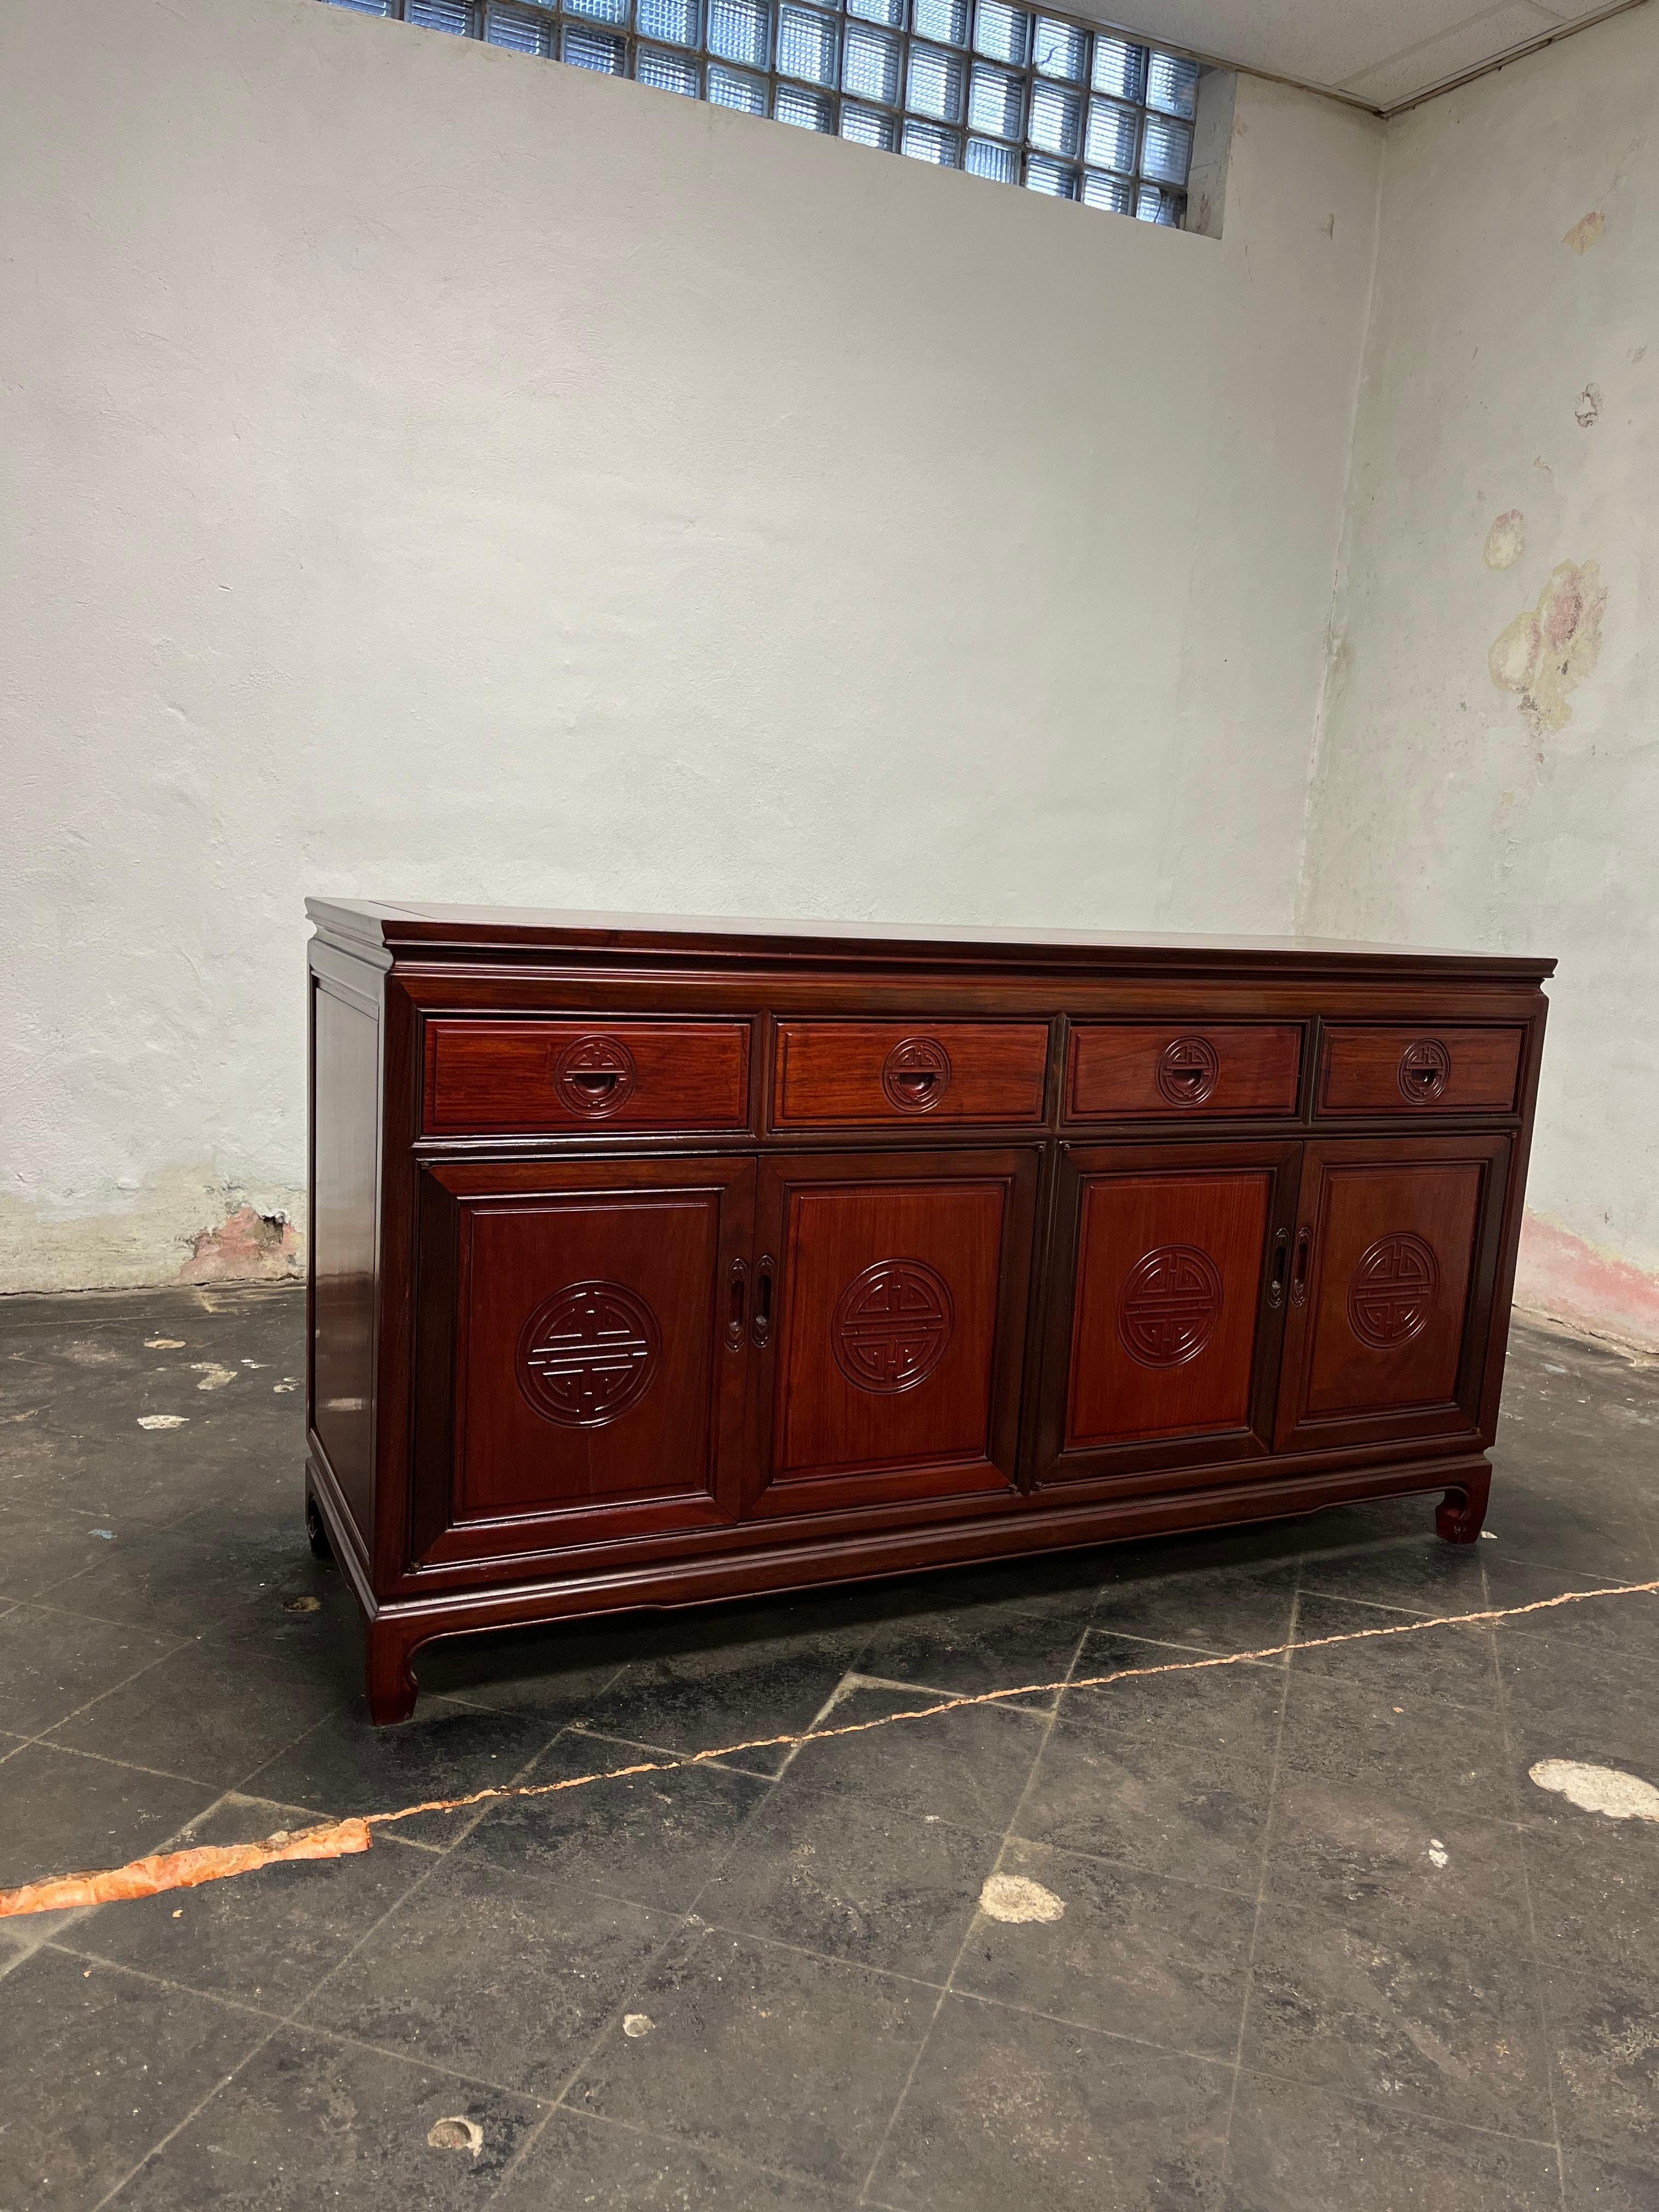 Handsome solid rosewood Chinoiserie Hollywood Regency buffet or credenza by George Zee. It is in fabulous vintage condition. Four drawers with four door front that house lower shelving. Finished back to allow for floating in the room. It has no